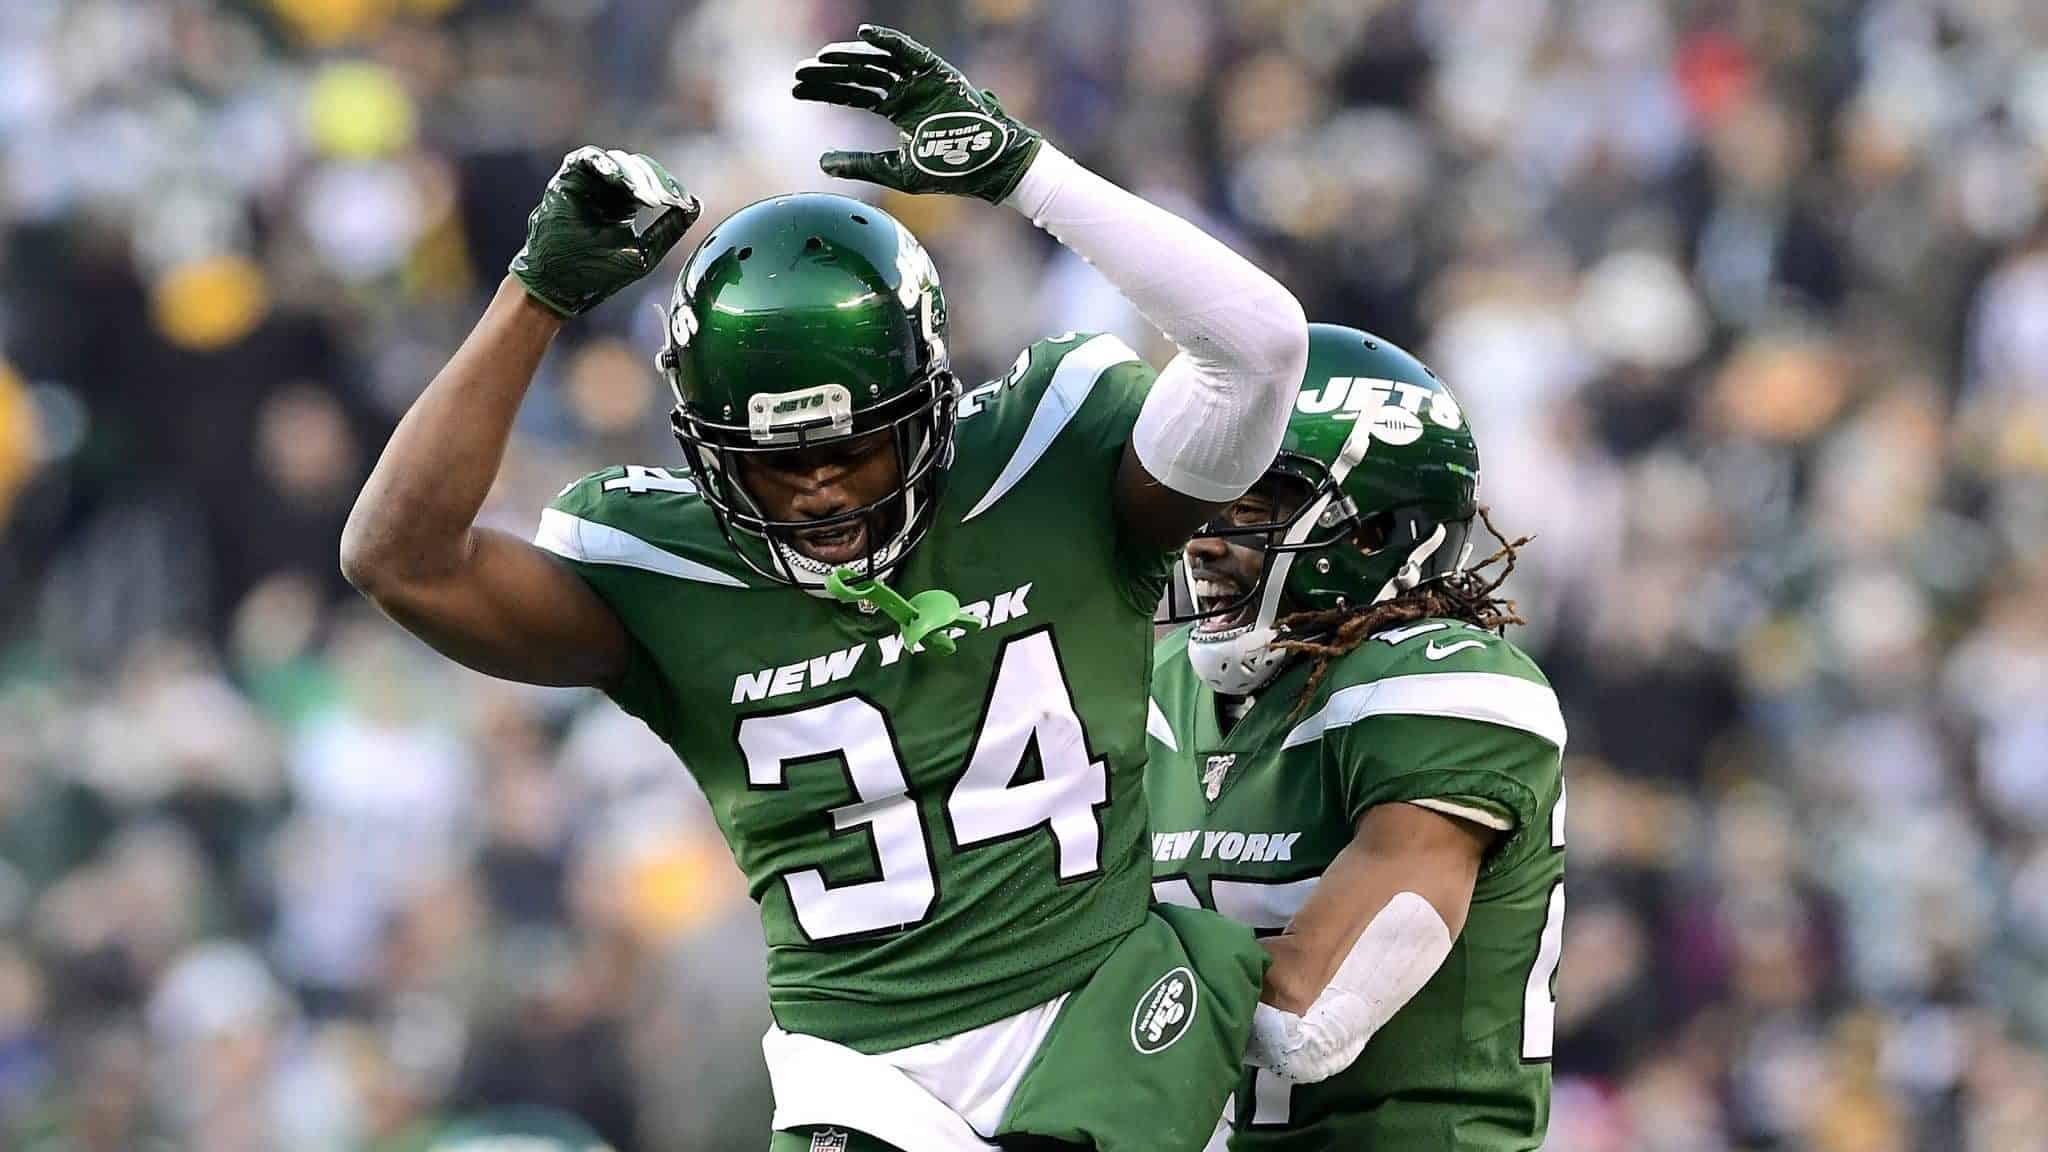 EAST RUTHERFORD, NEW JERSEY - DECEMBER 22: Brian Poole #34 and Darryl Roberts #27 of the New York Jets celebrate after a turnover on downs as their teams defeats the Pittsburgh Steelers 16-10 at MetLife Stadium on December 22, 2019 in East Rutherford, New Jersey.